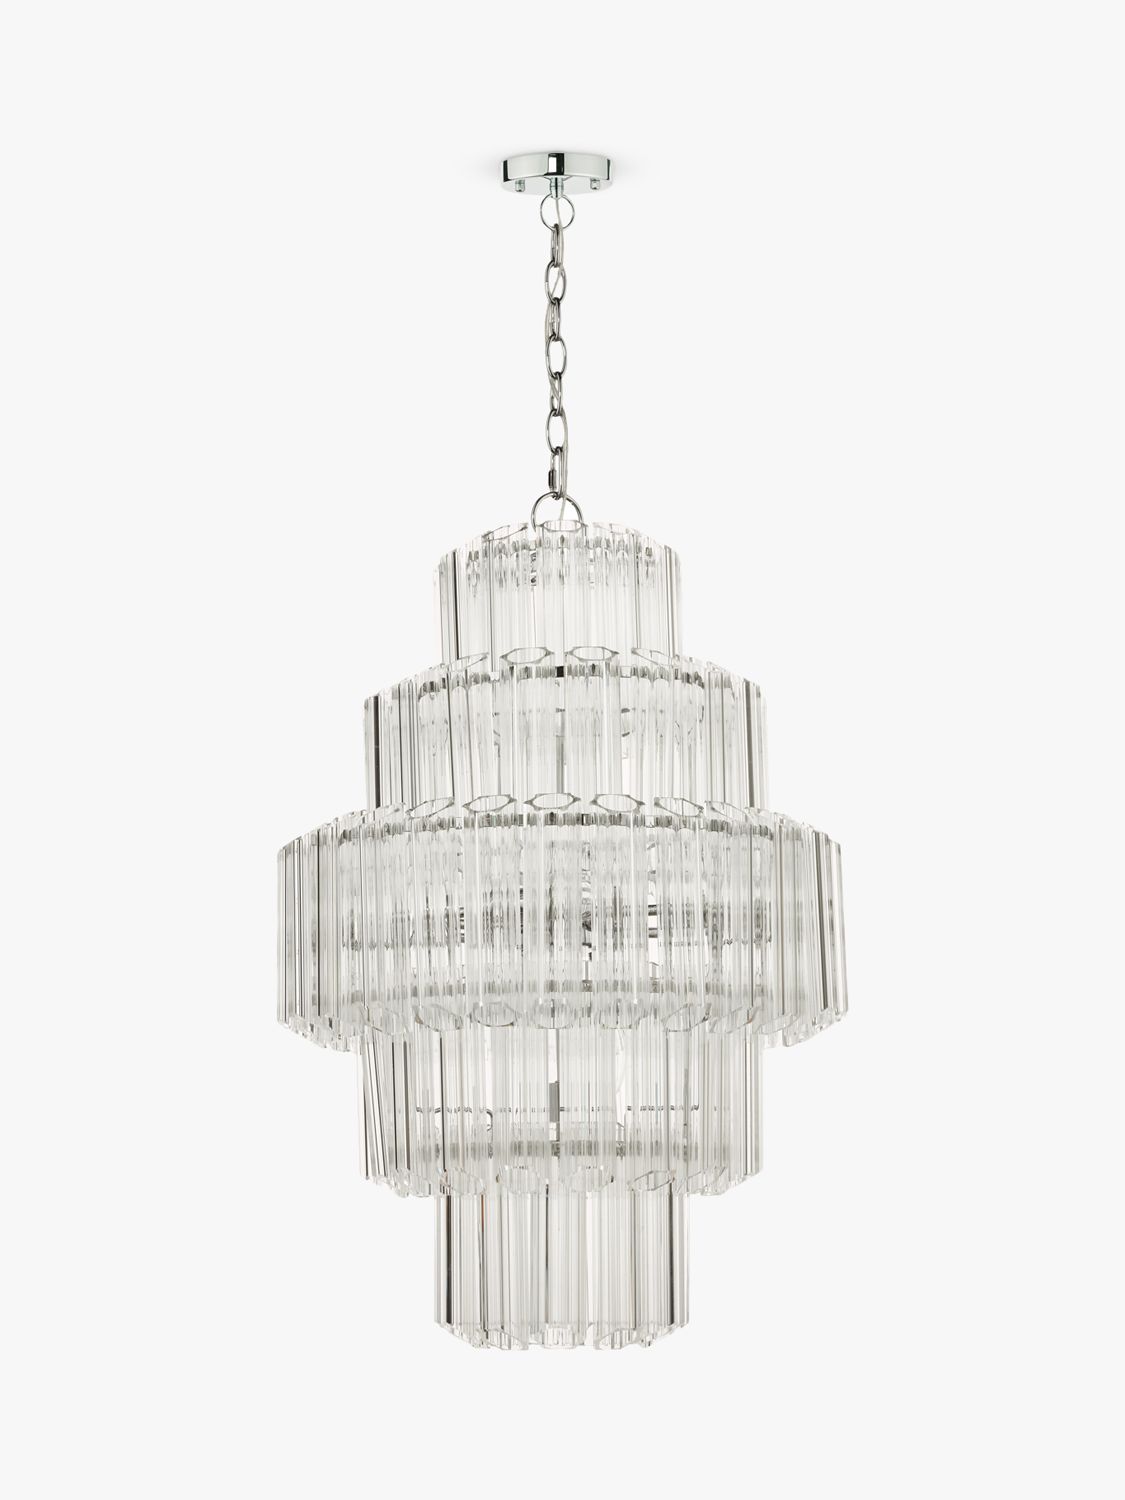 Photo of Laura ashley genvieve grand tiered ceiling light chrome